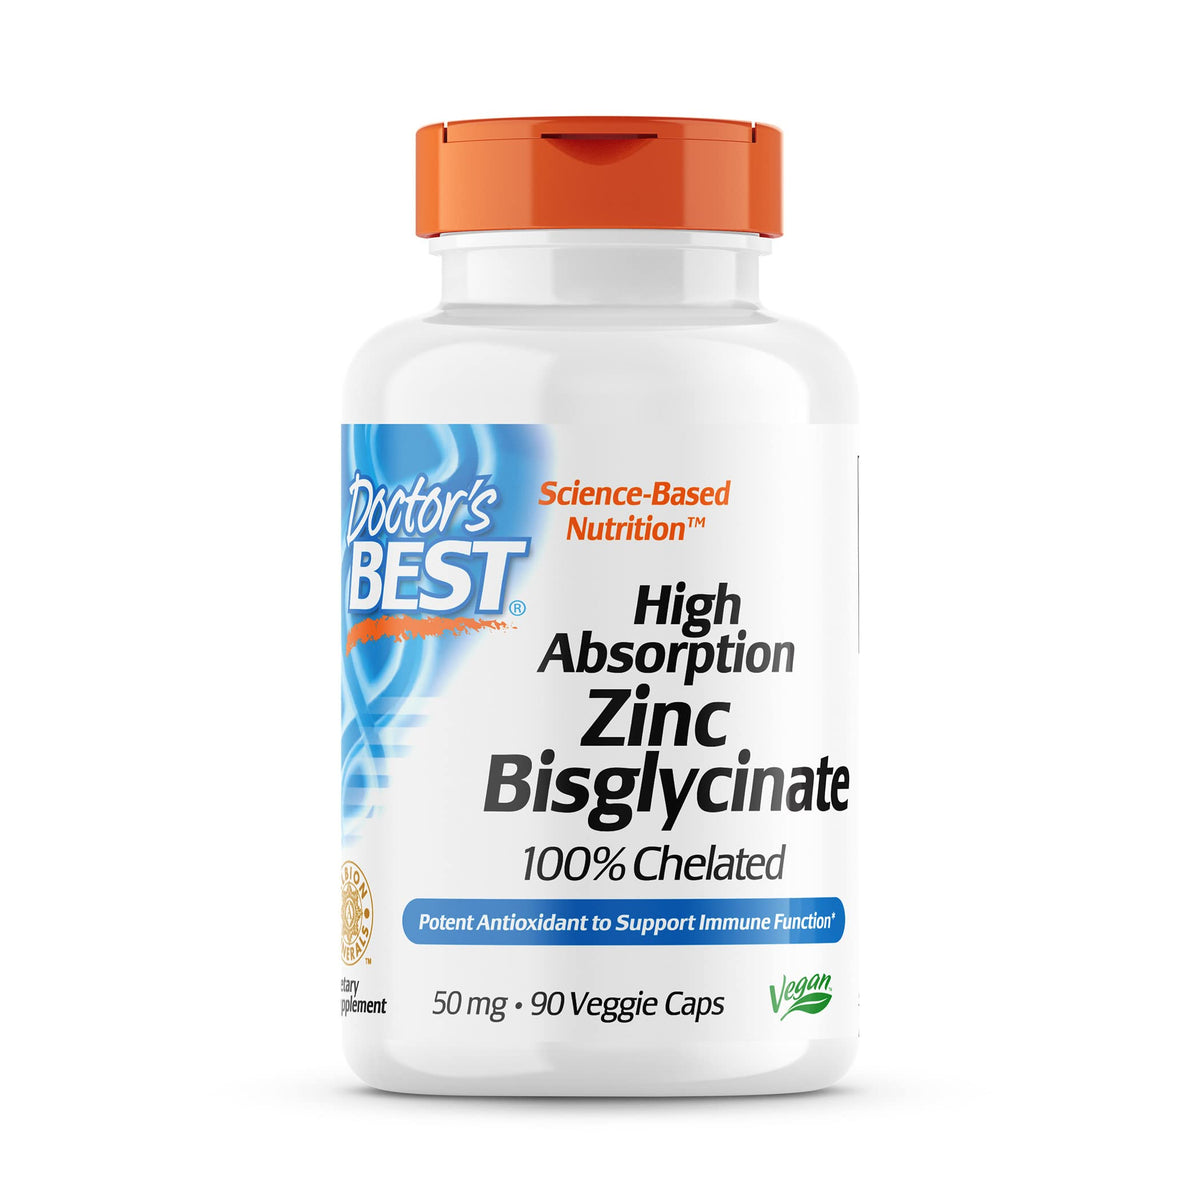 High Absorption Zinc Bisglycinate, 50mg - Doctor's Best